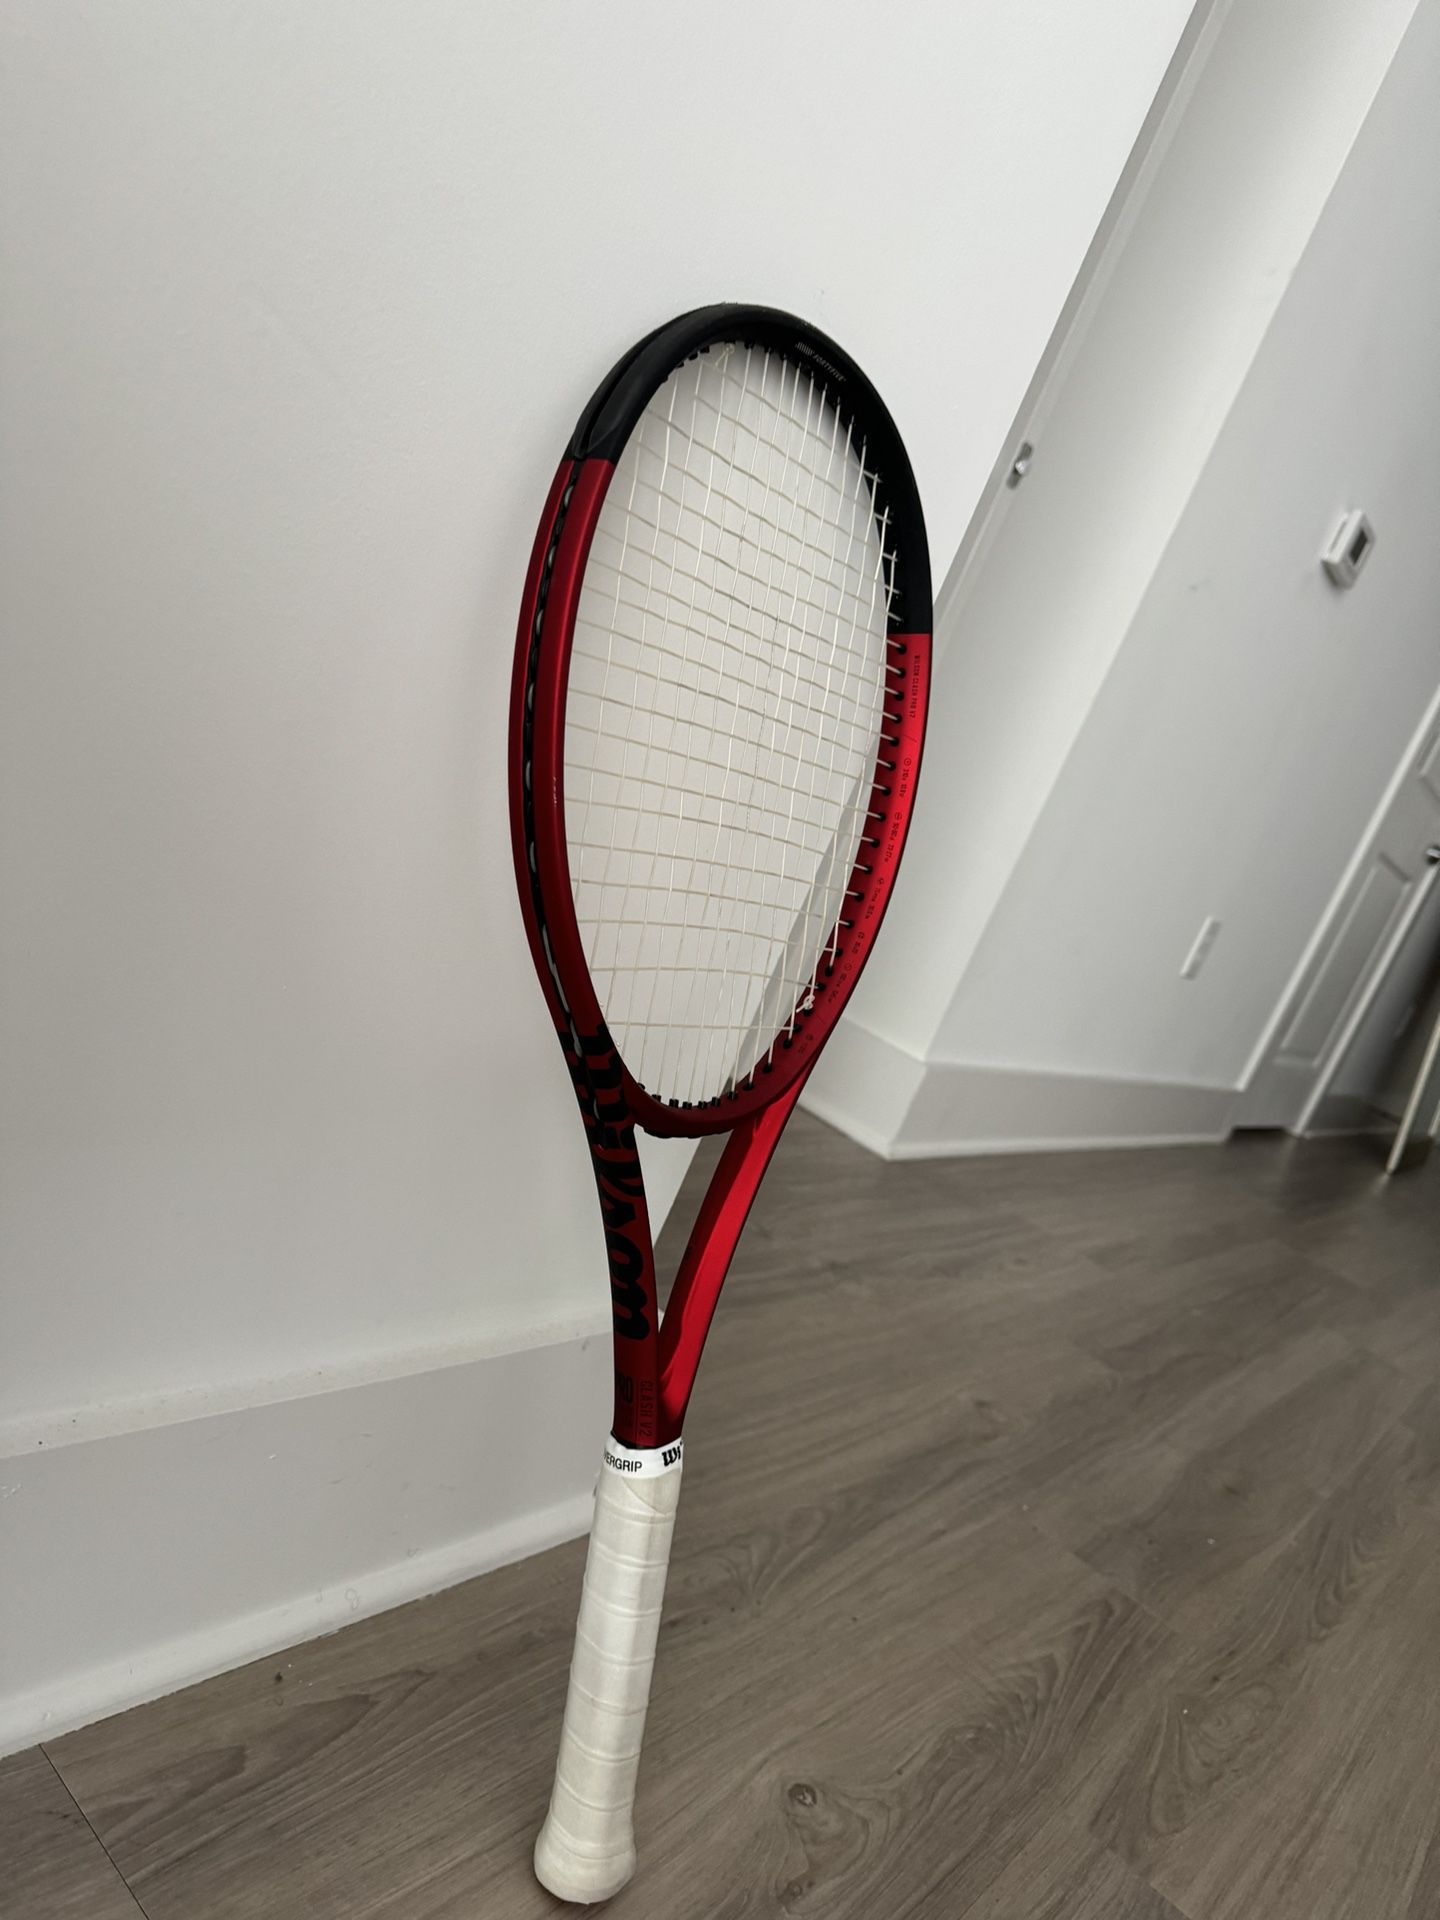 Brand new Wilson clash V2 pro tennis racket 100 Grip size 4 3/8” for sale 